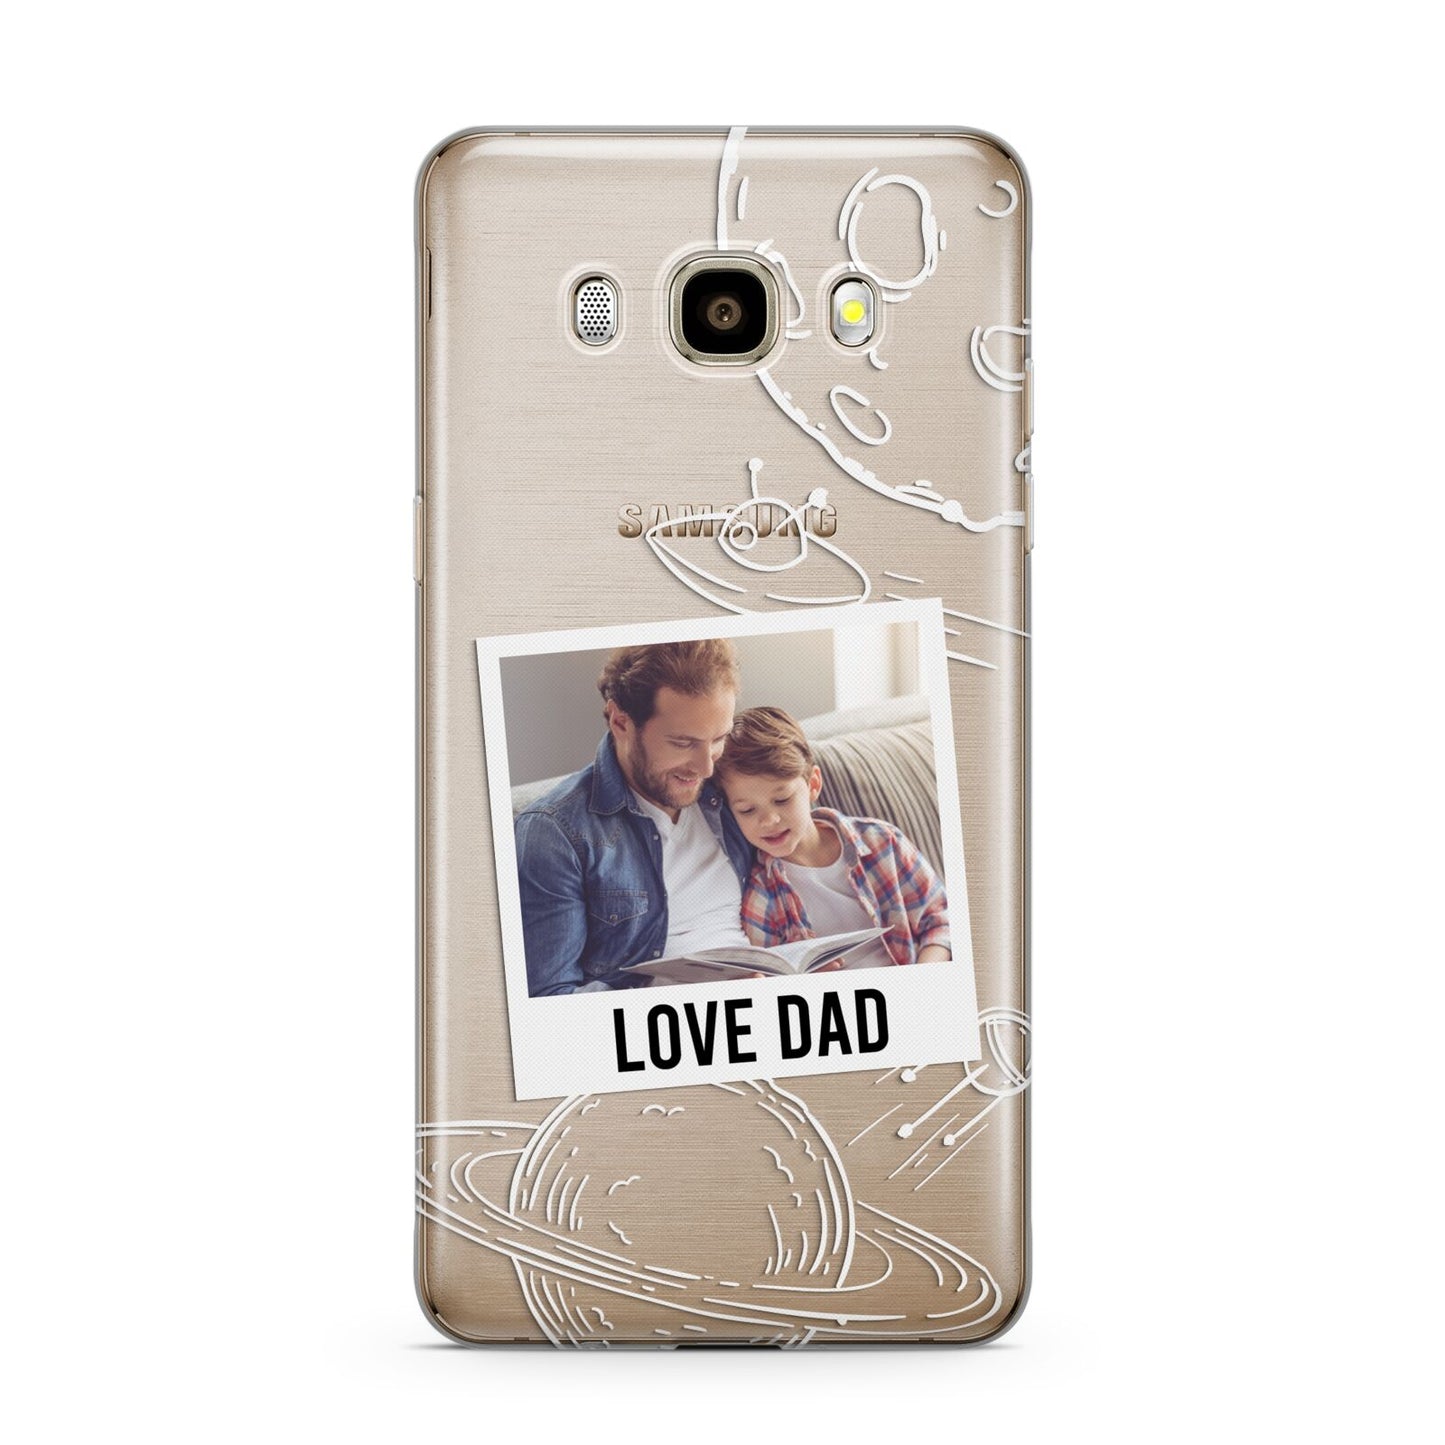 Personalised From Dad Photo Samsung Galaxy J7 2016 Case on gold phone